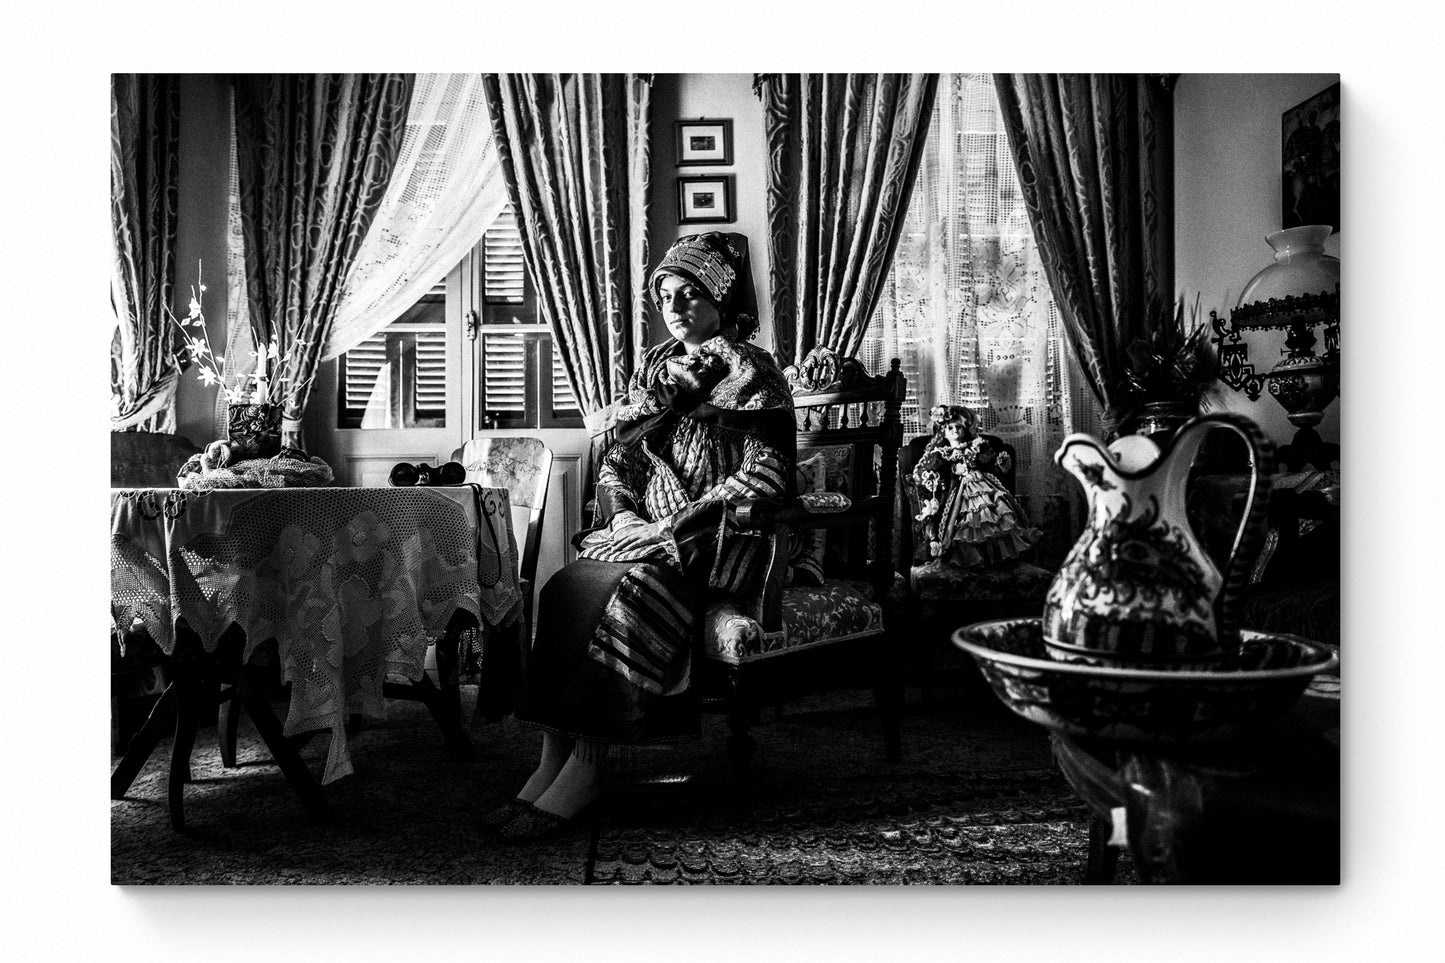 Black and White Photography Wall Art Greece | Costume of Symi island inside a traditional house Dodecanese Greece by George Tatakis - whole photo